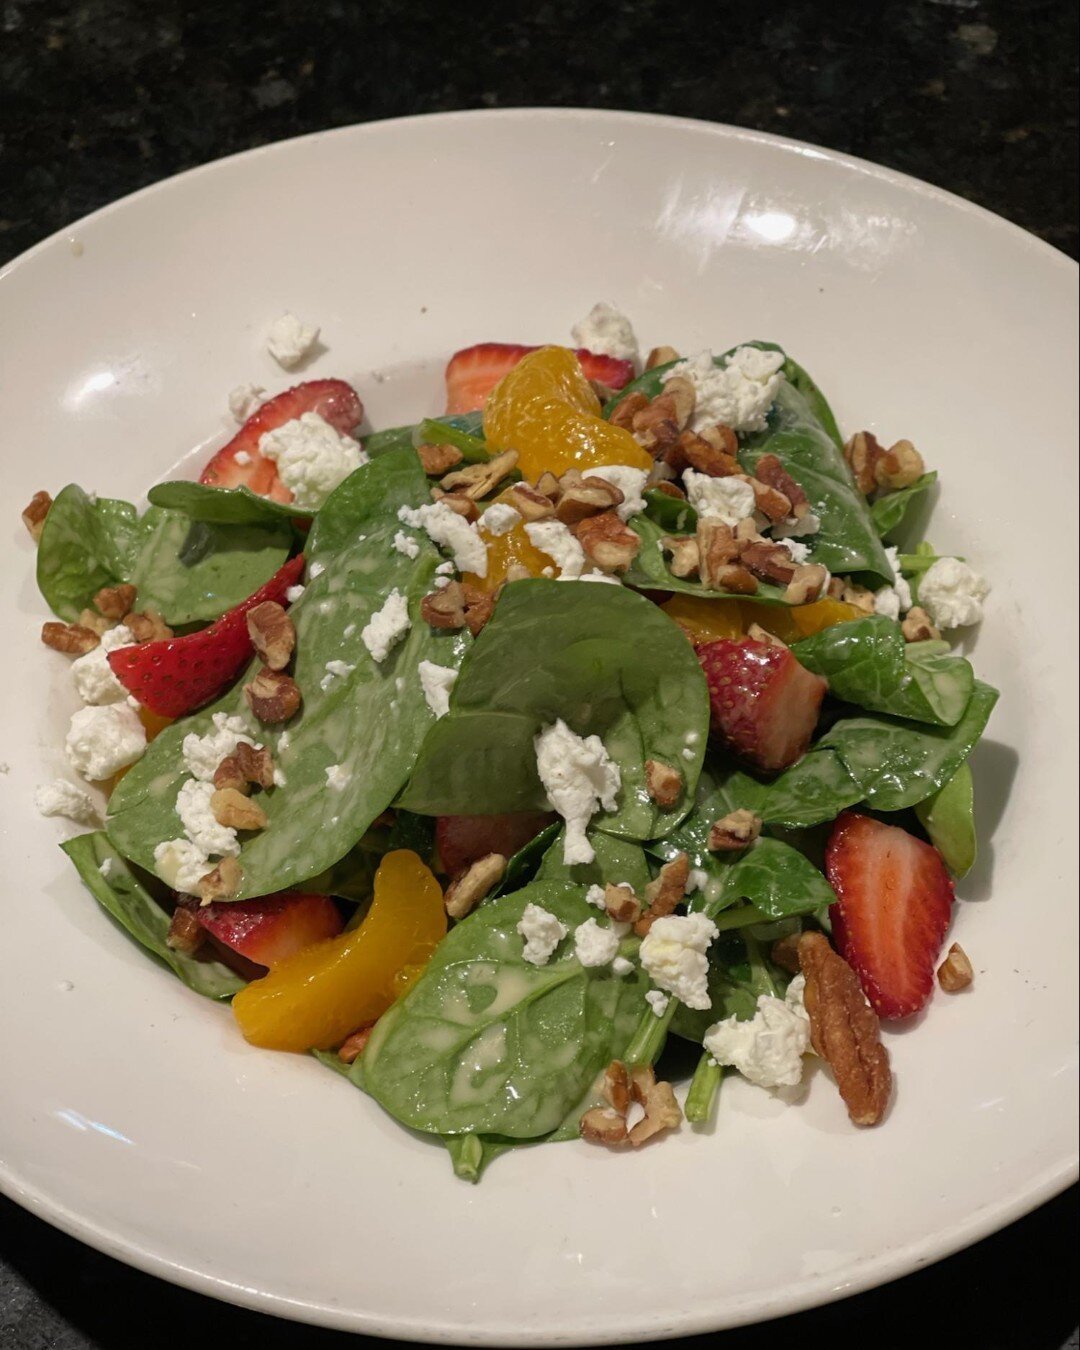 Spring Field. 

The new Baby Spinach Salad graces our menus with strawberry, mandarin orange, goat cheese, candied pecans and an apple cider vinaigrette. 

Add a piece of protein for a heart and healthy lunch option.